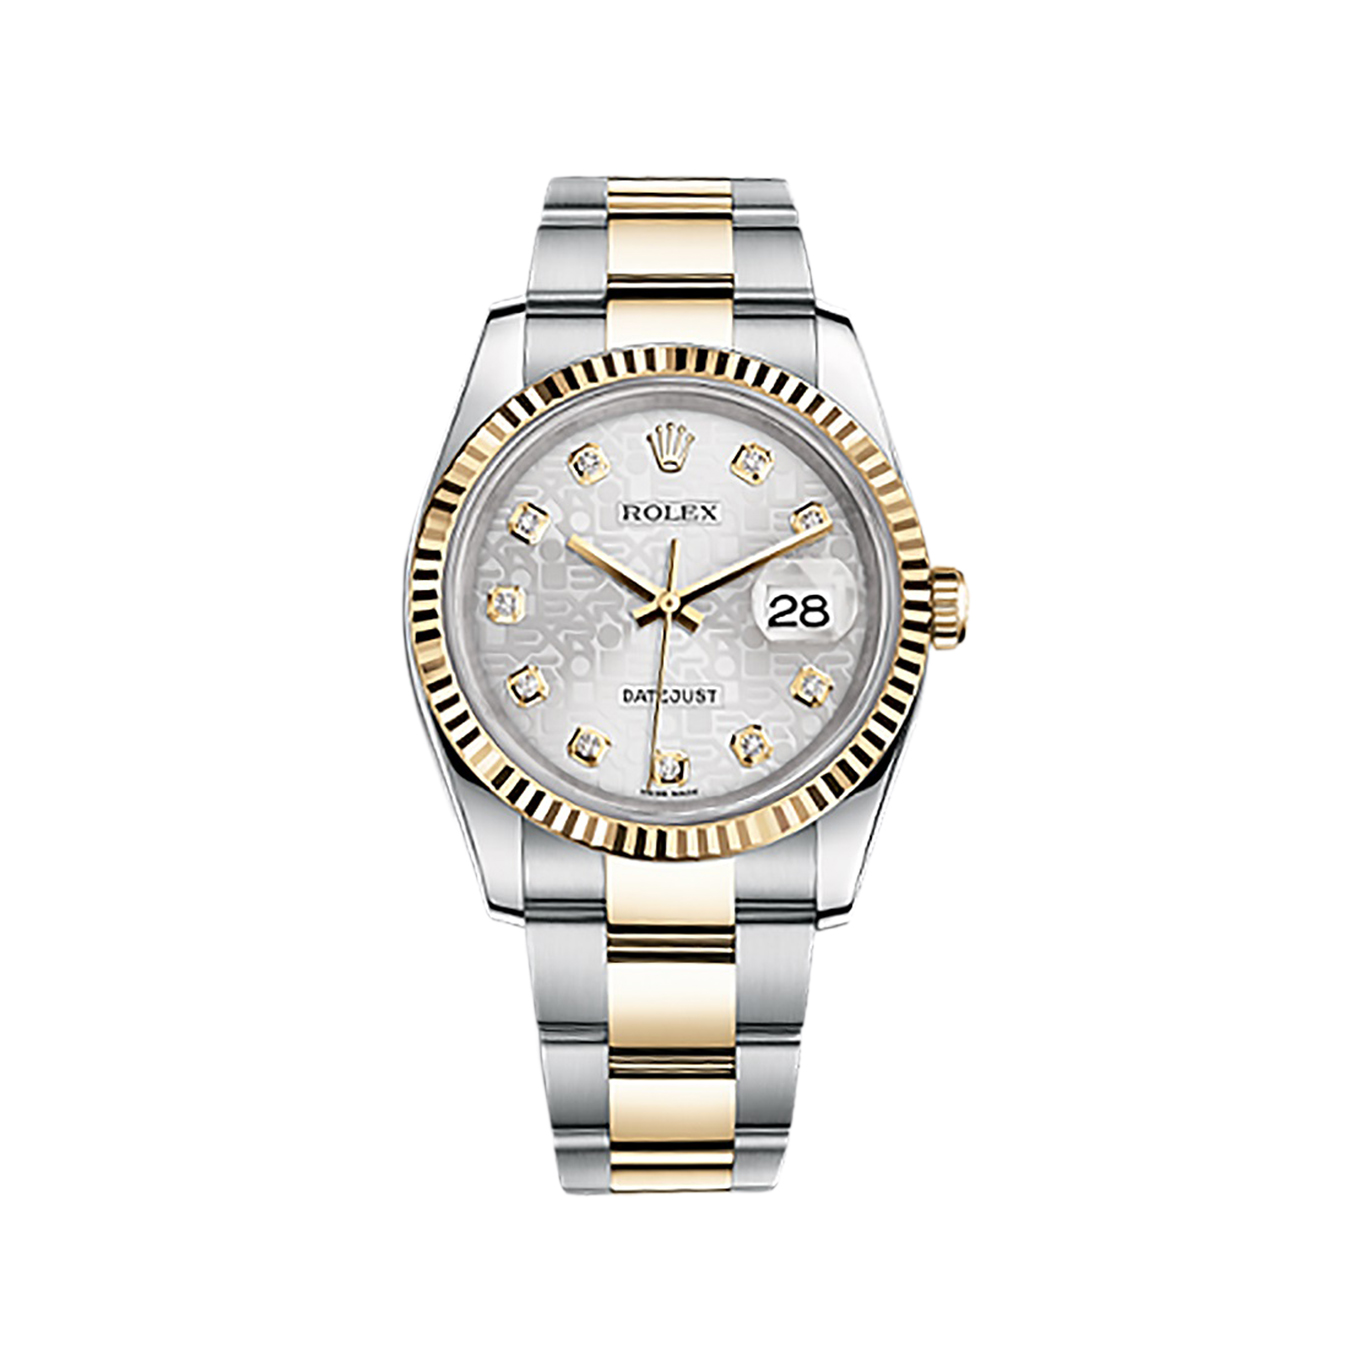 Datejust 36 116233 Gold & Stainless Steel Watch (Silver Jubilee Design Set with Diamonds)